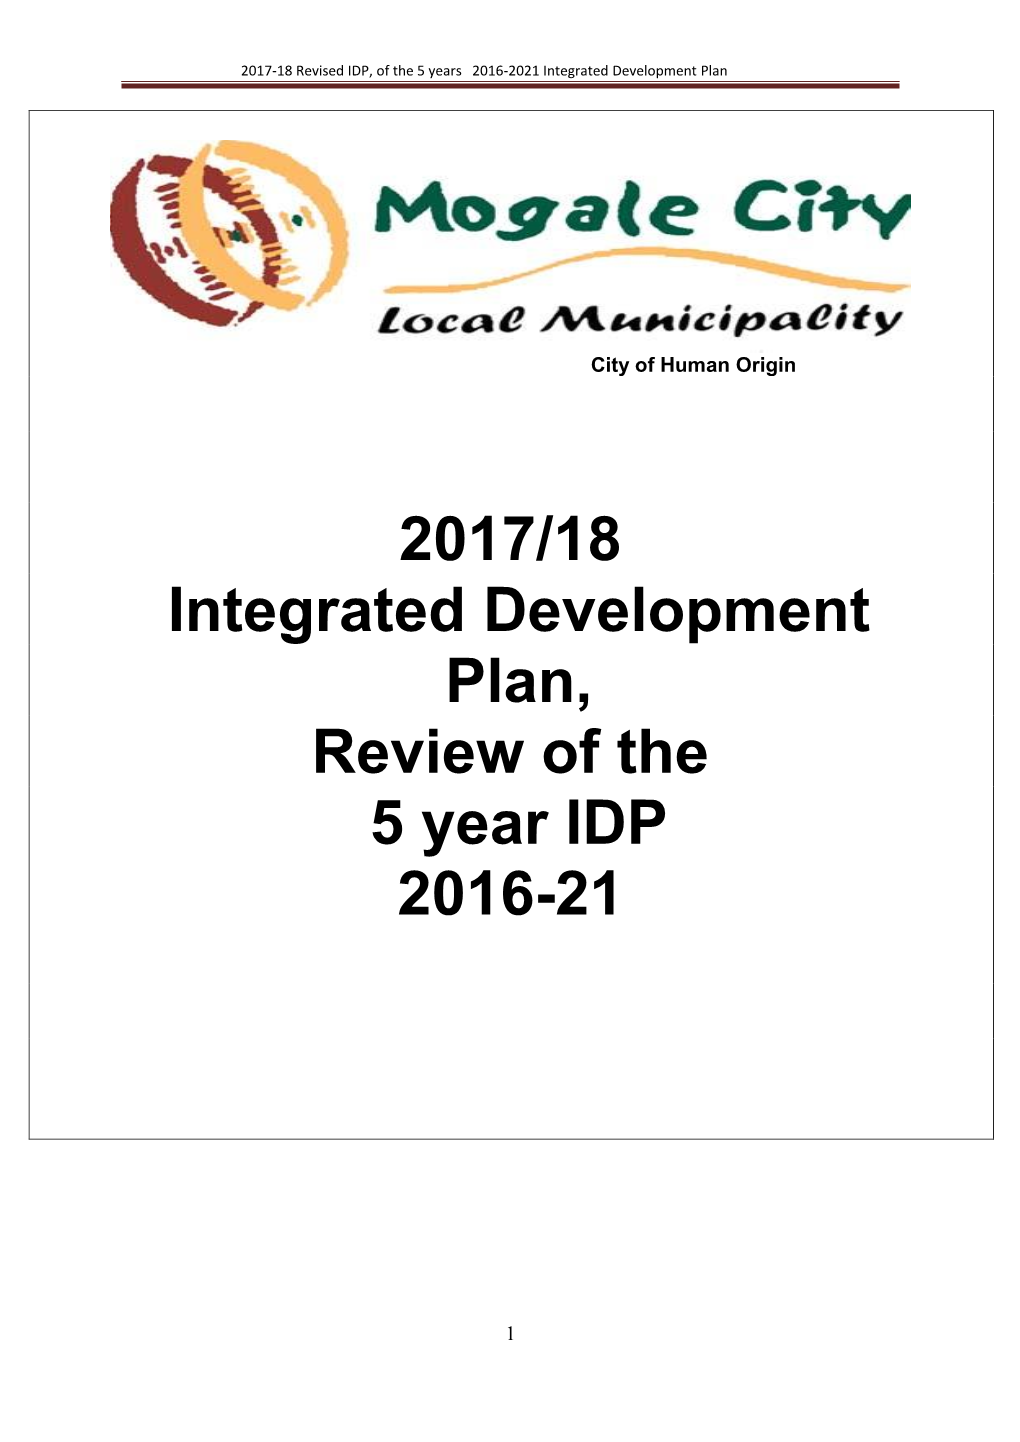 2017/18 Integrated Development Plan, Review of the 5 Year IDP 2016-21